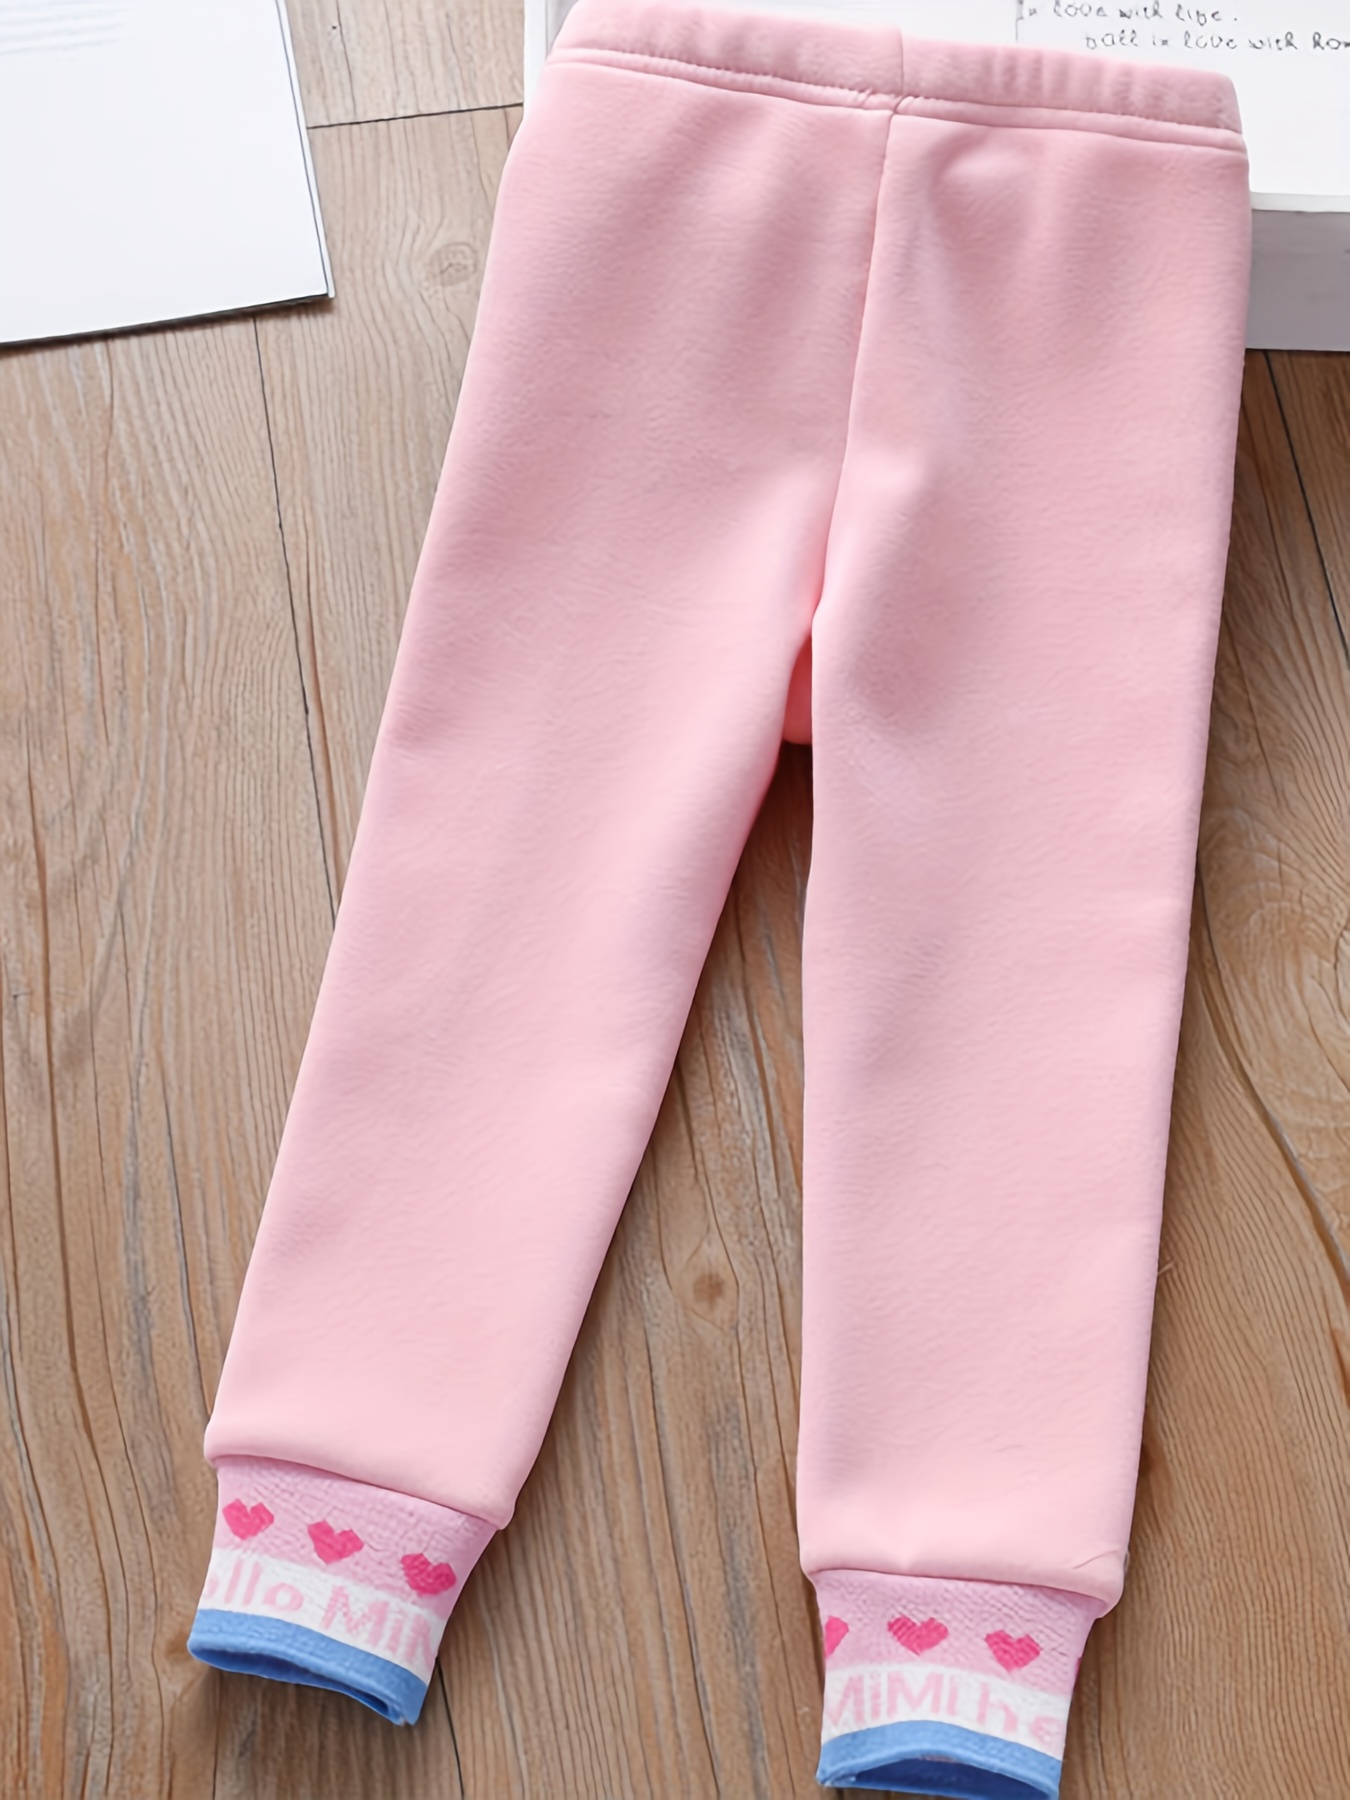 Cotton Girls Leggings Princess Tight Pants Skinny Sweatpants Spring Autumn  Children Letter Trousers Teenager Kids Clothes 5-14Y